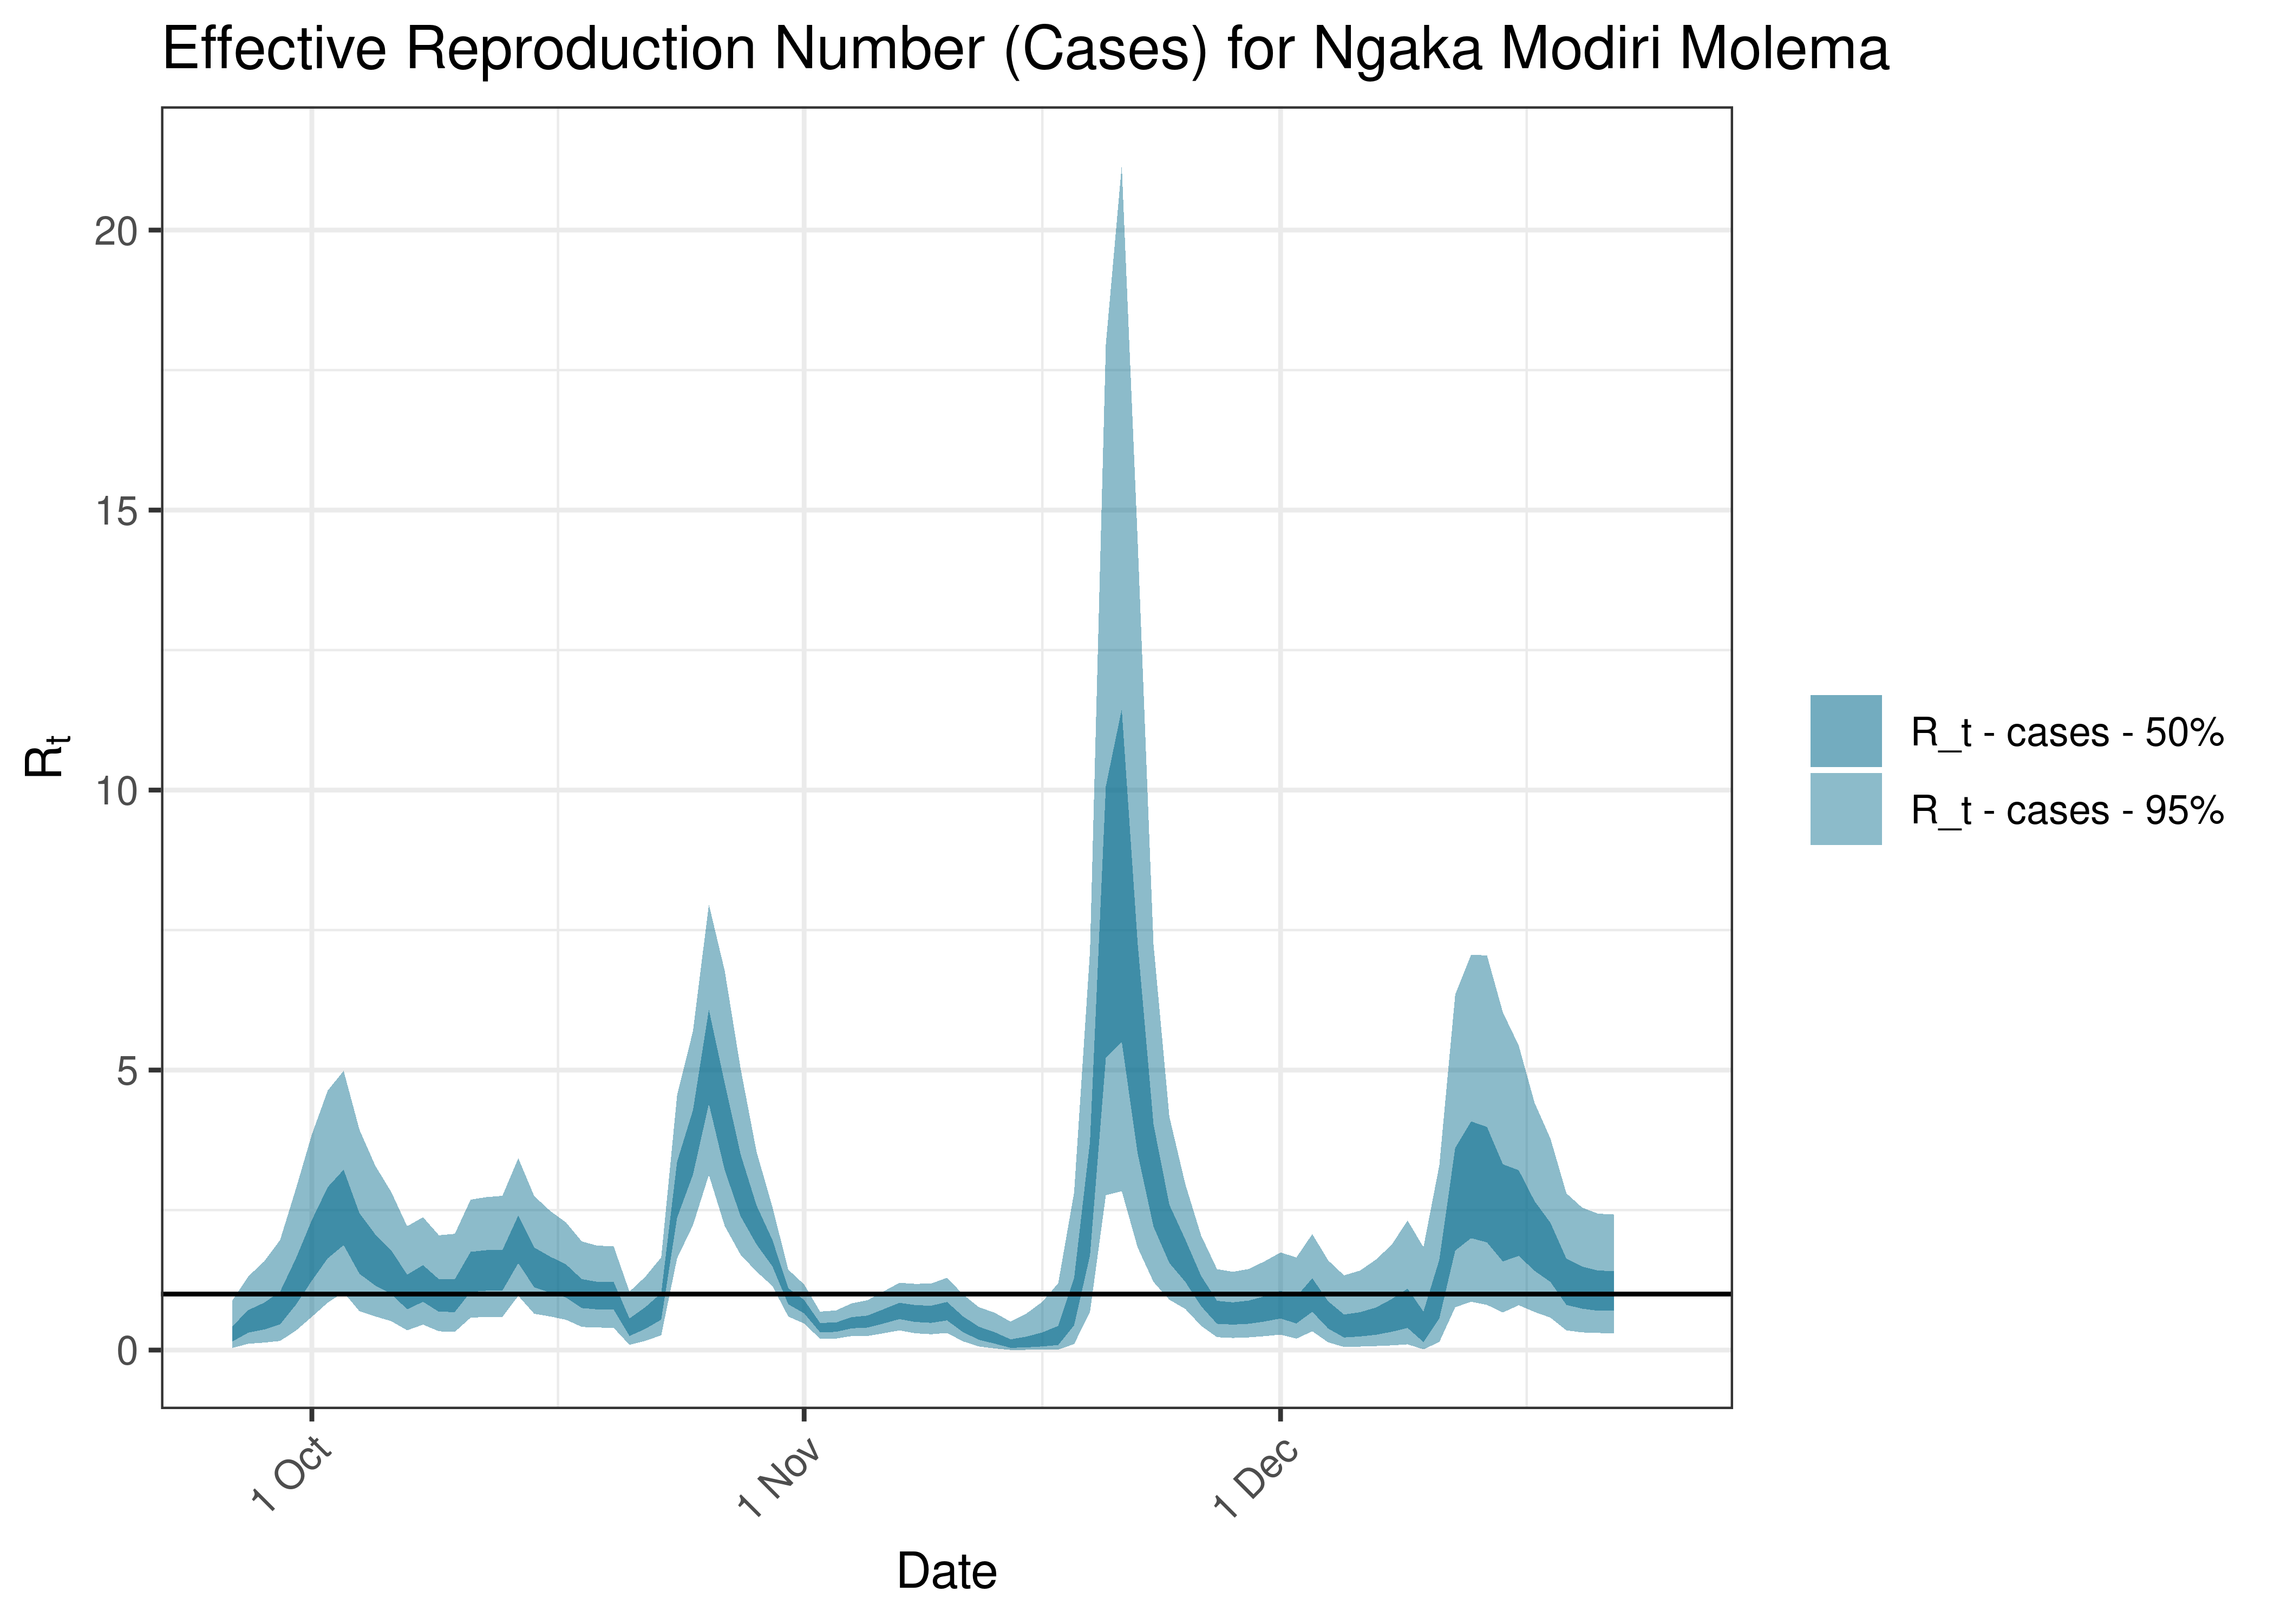 Estimated Effective Reproduction Number Based on Cases for Ngaka Modiri Molema over last 90 days